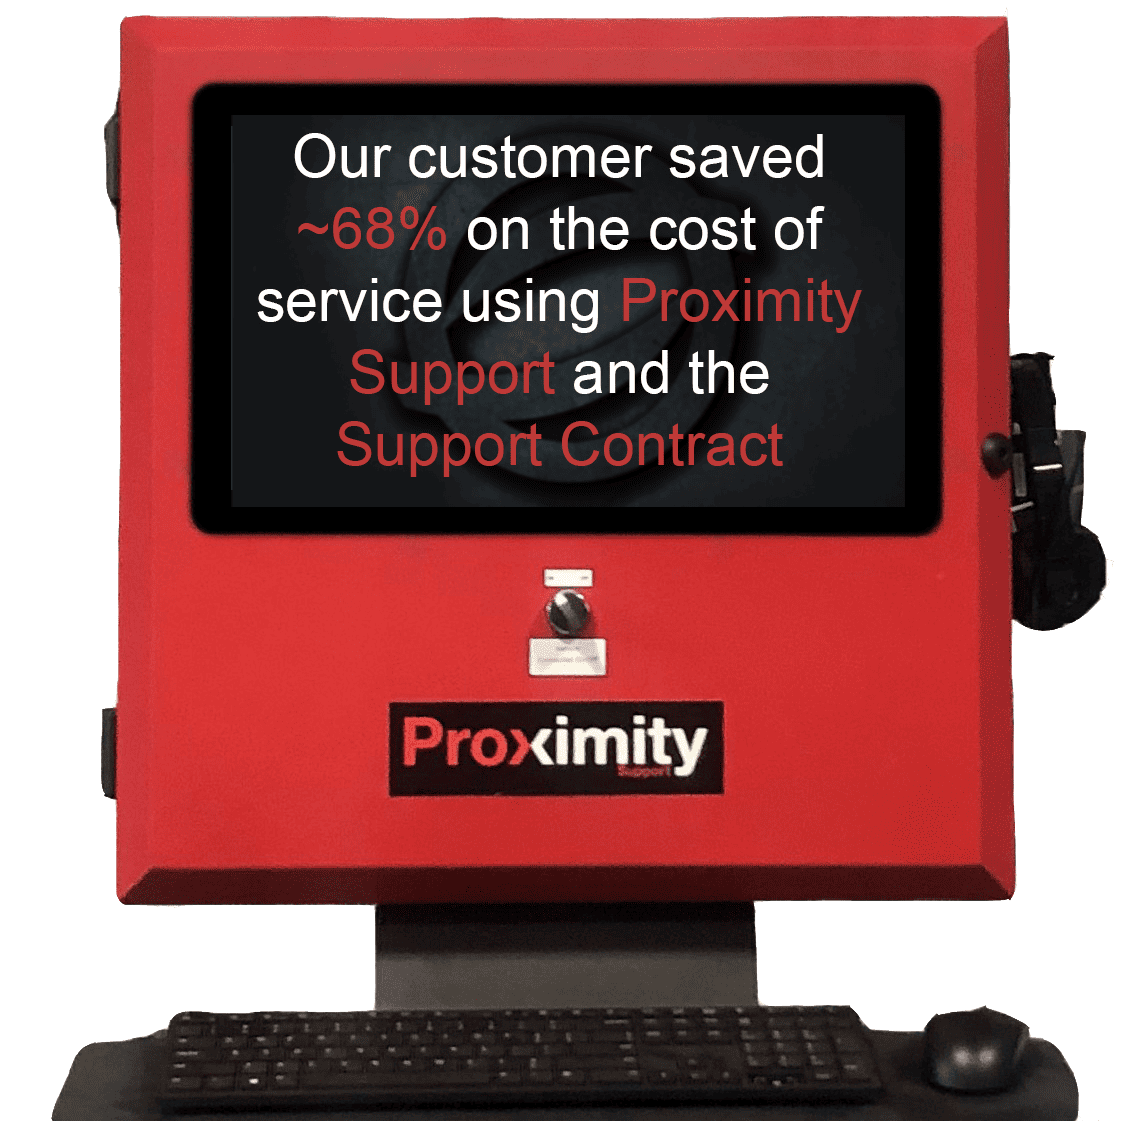 BOS Proximity Support panel with text on the screen reading, "Our customer saved ~68% on the cost of service using Proximity Support and the Support Contract